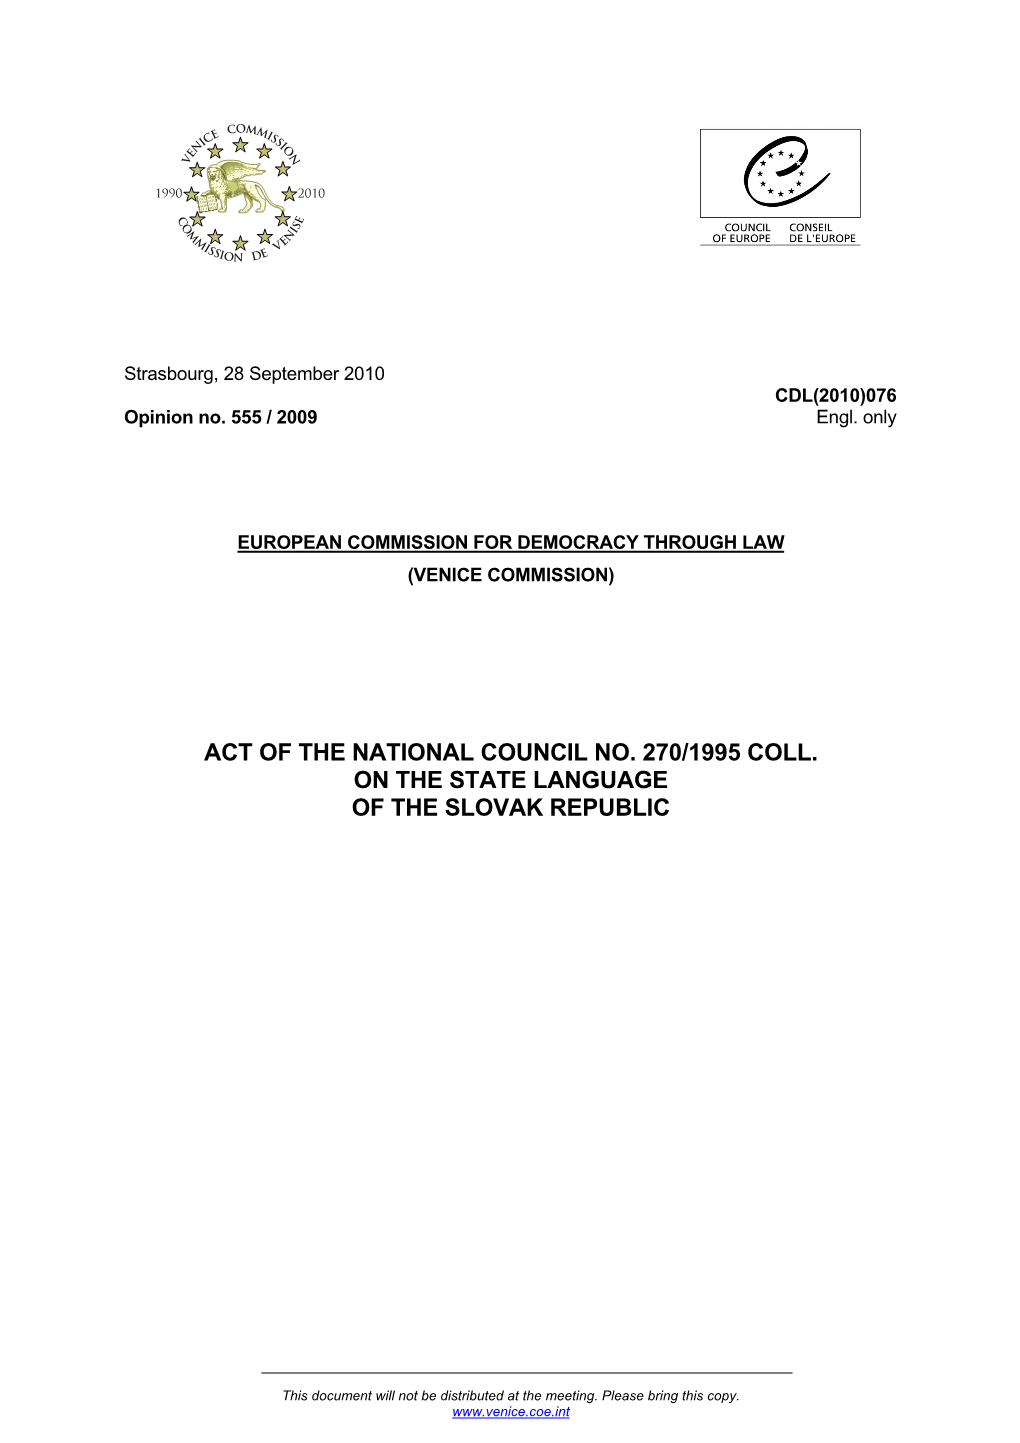 Act of the National Council No. 270/1995 Coll. on the State Language of the Slovak Republic